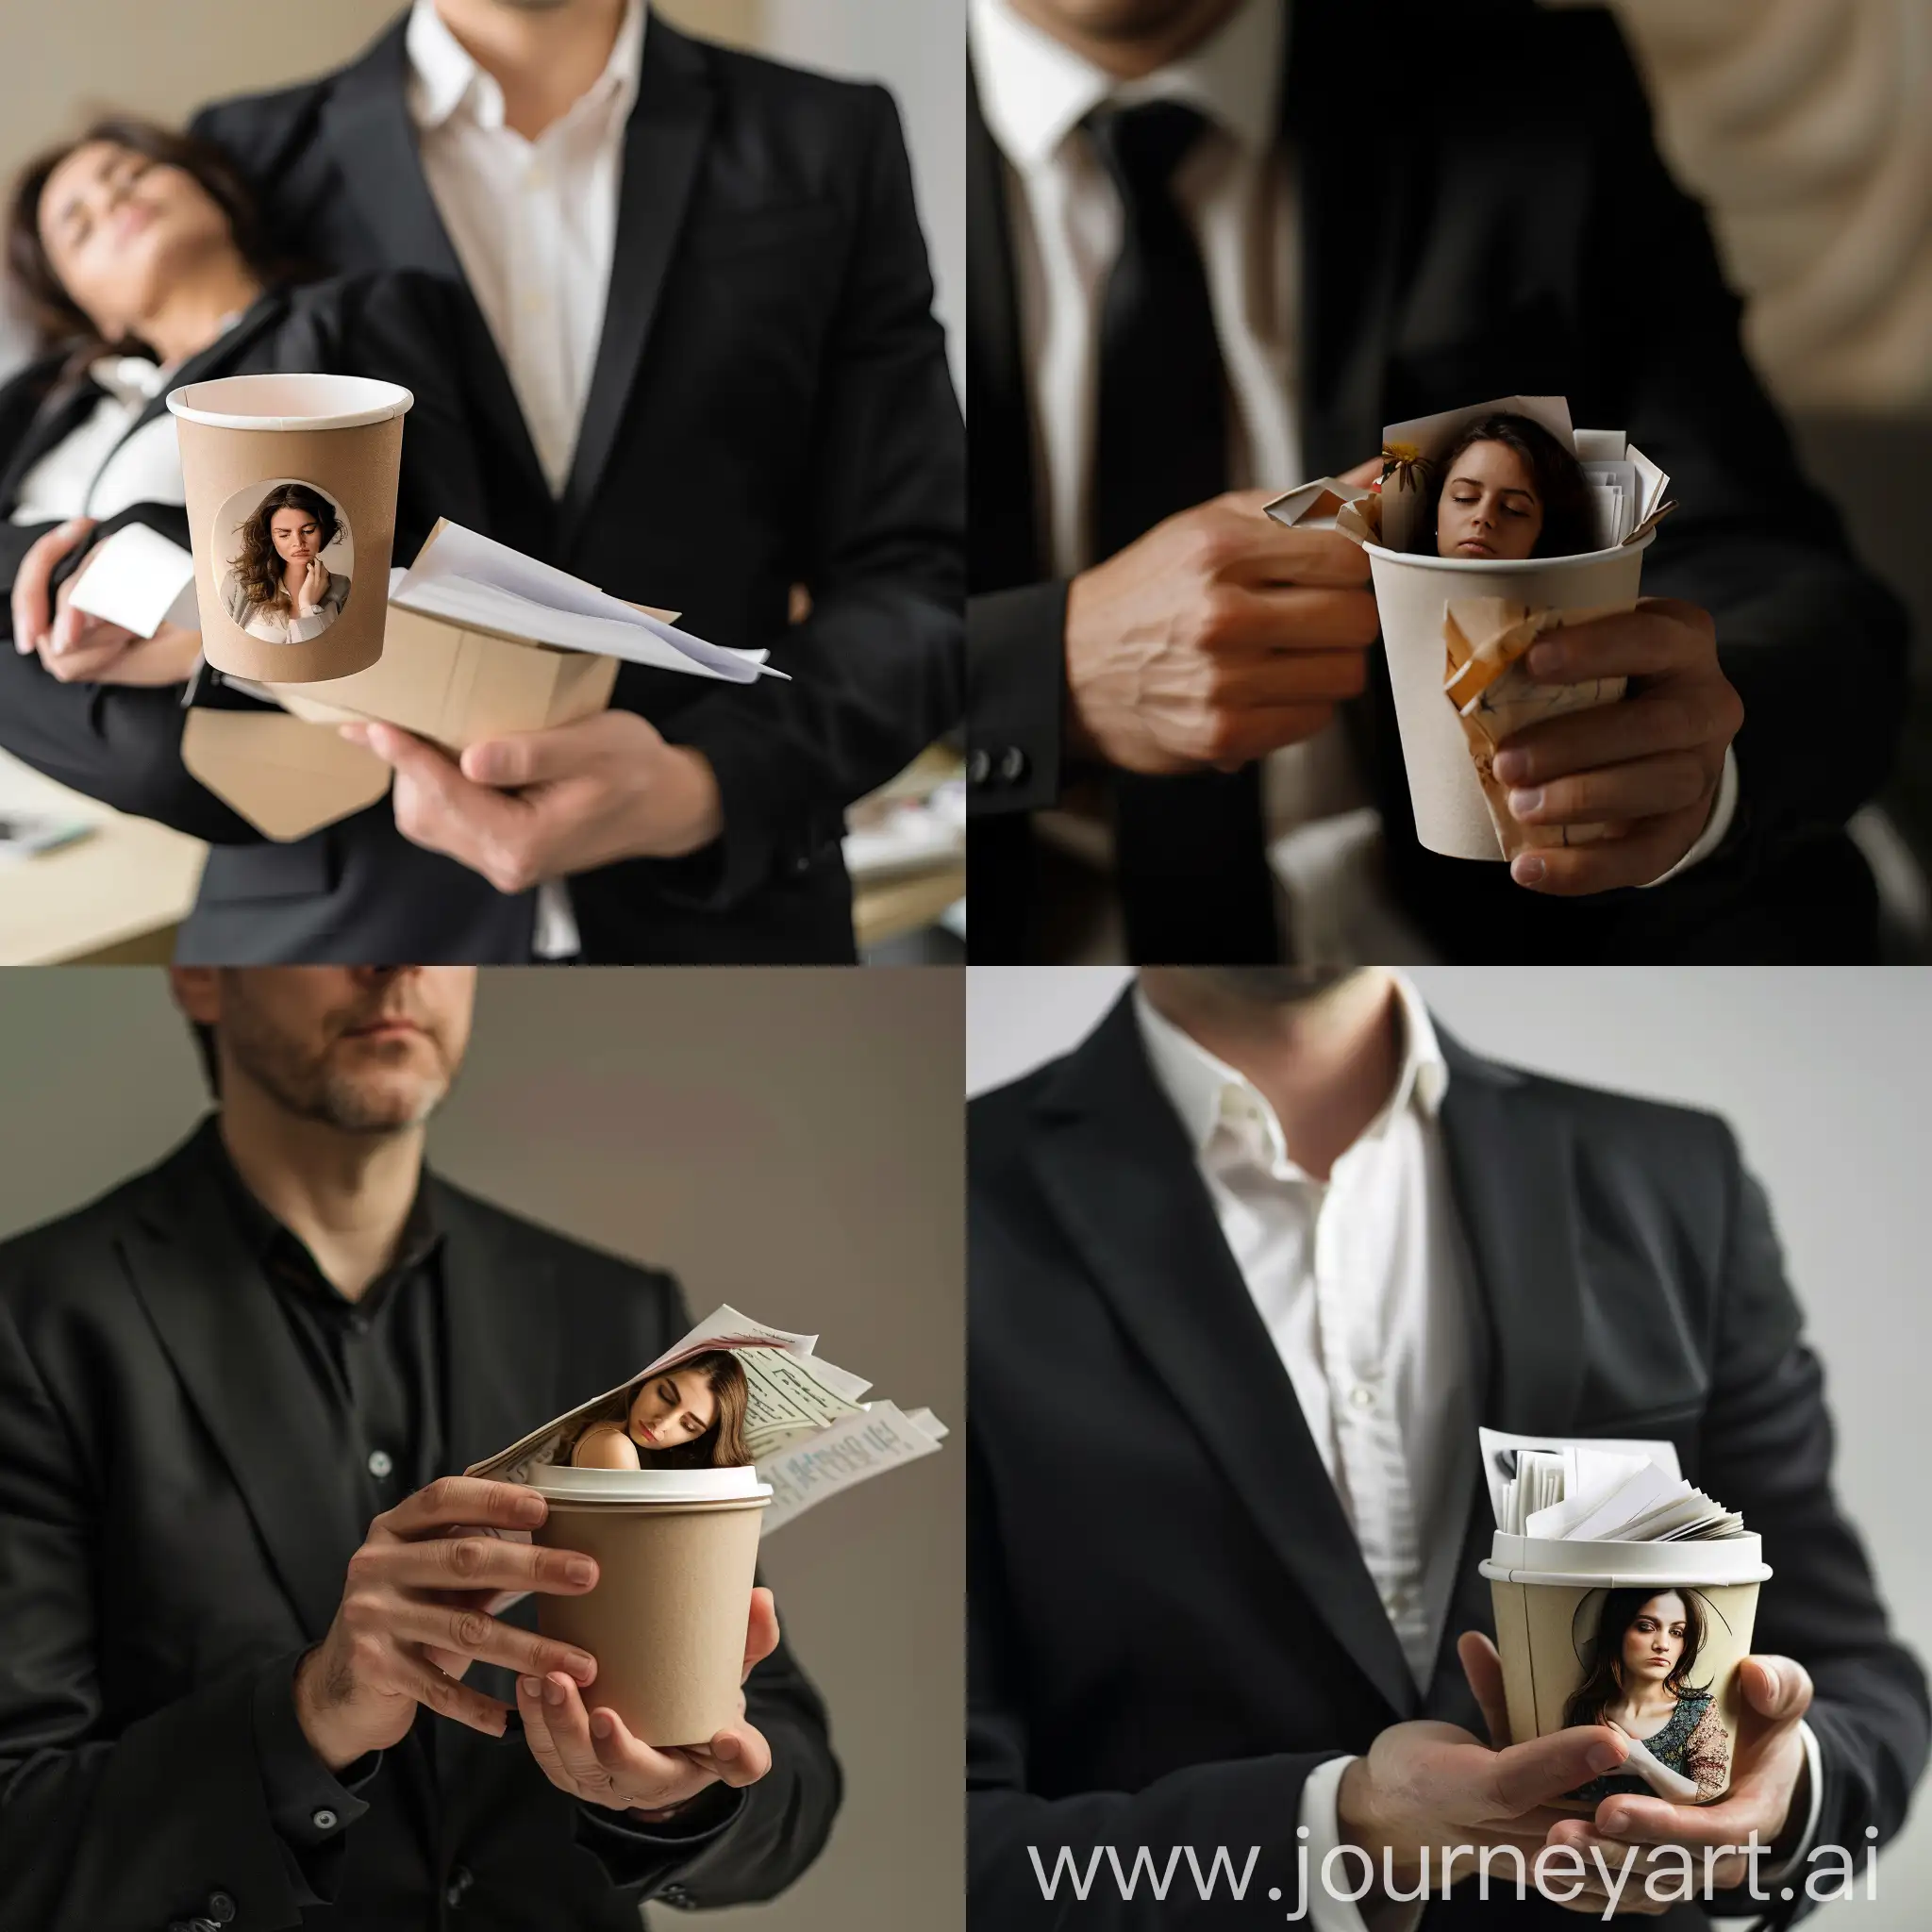 A Boss in black suit holding a paper cup in hand which a tired woman is inside the cup working with a lot paper work.photo should be focus on the cup